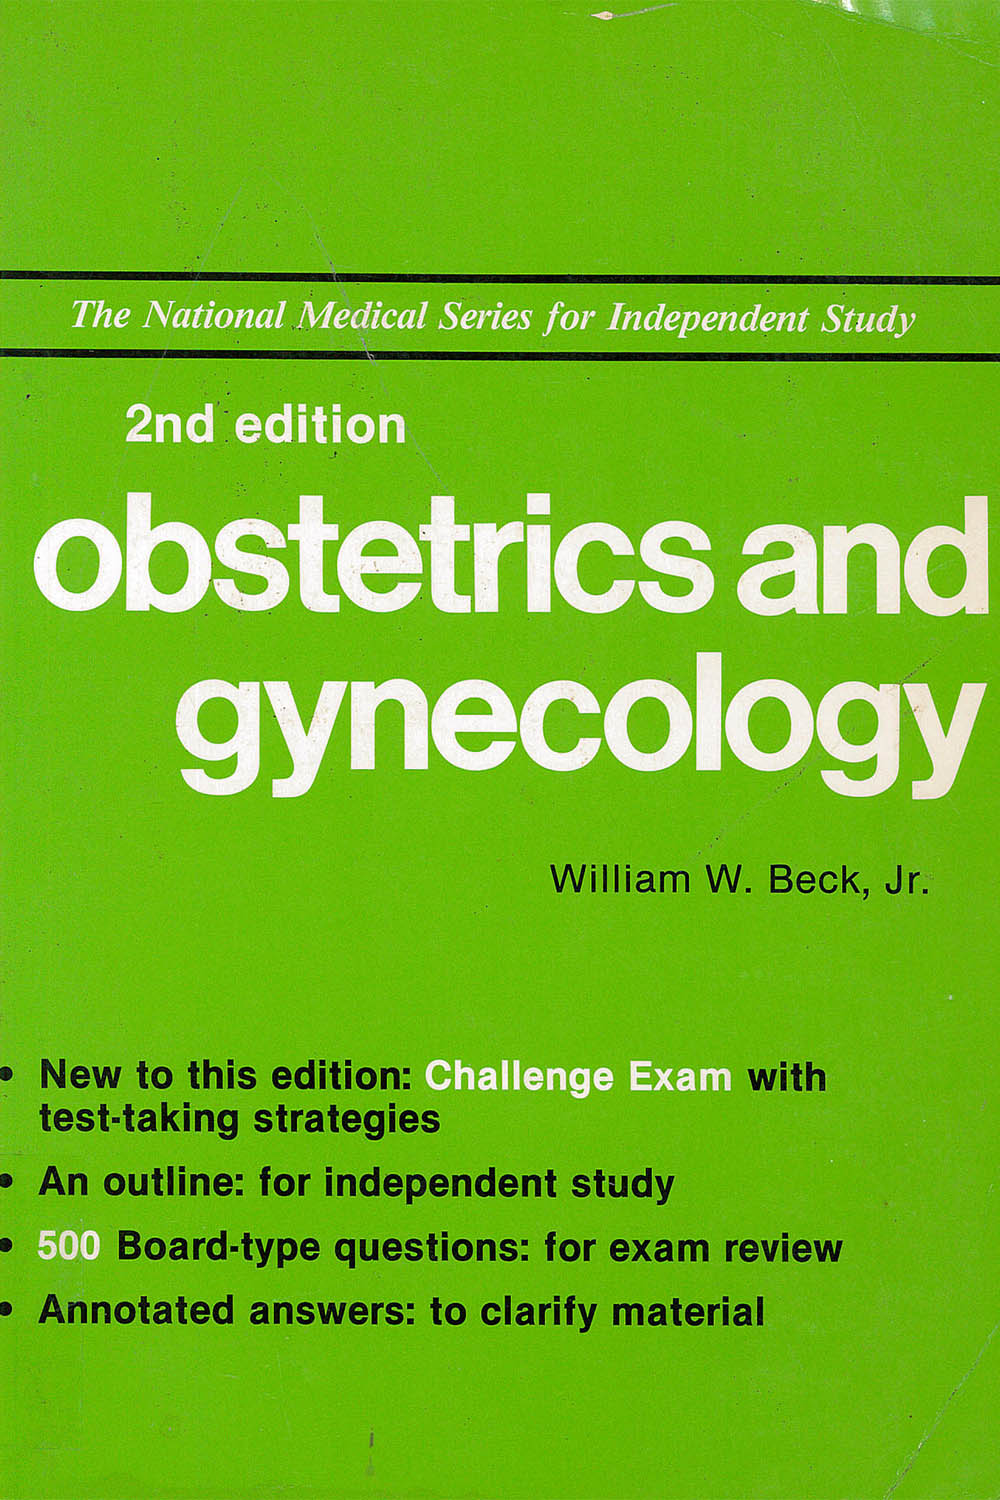 16 / 26 - RG111 O-68 1988 Obstetrics and Gynecology, William W. Beck Jr. - NMS USA